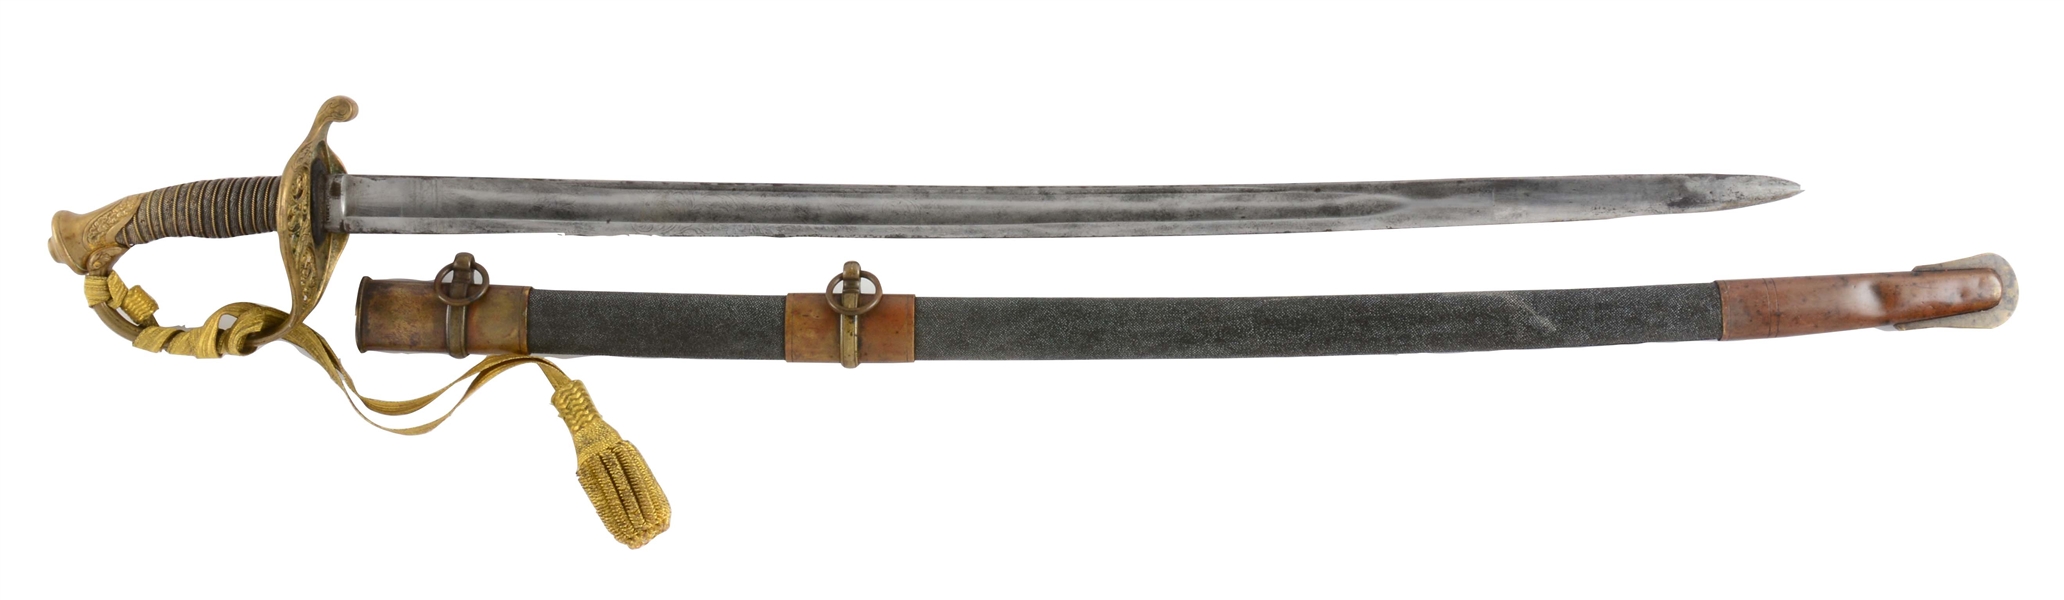 U.S. MODEL 1850 FOOT OFFICERS SWORD WITH ASSOCIATED PRESENTATION SCABBARD